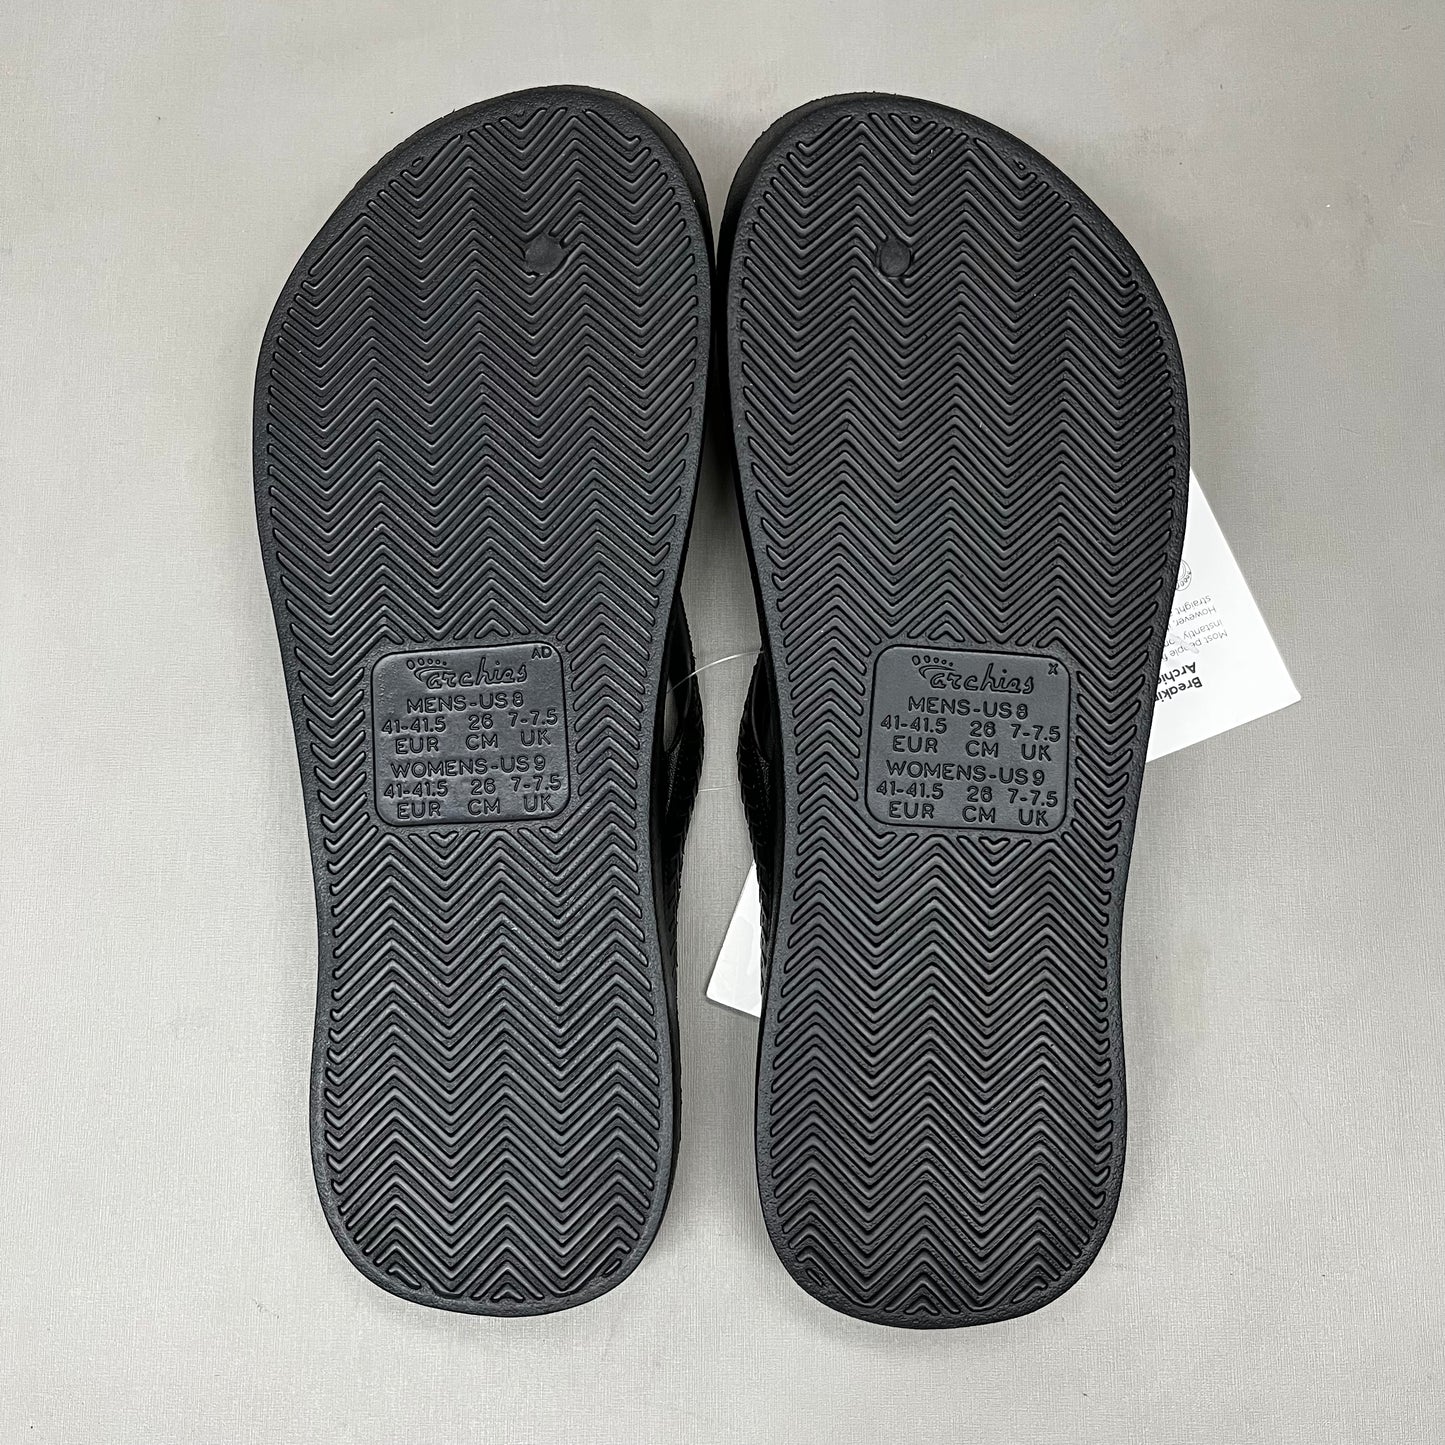 ARCHIES Arch Support Thongs HIGH SUPPORT Flip Flops Men's Sz 14 Black (New)